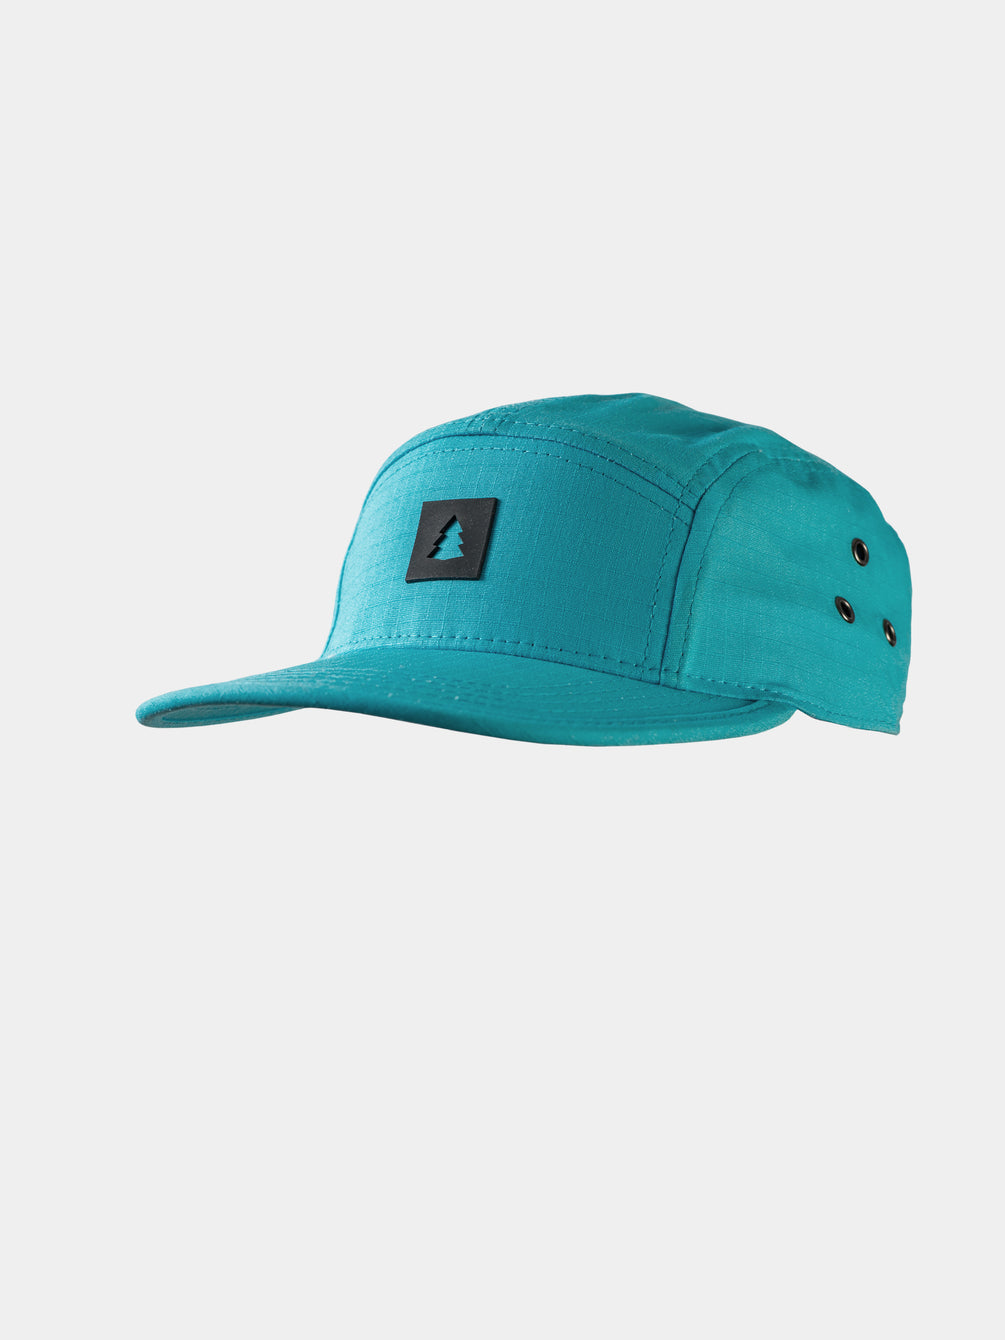 Rubber 5 panel